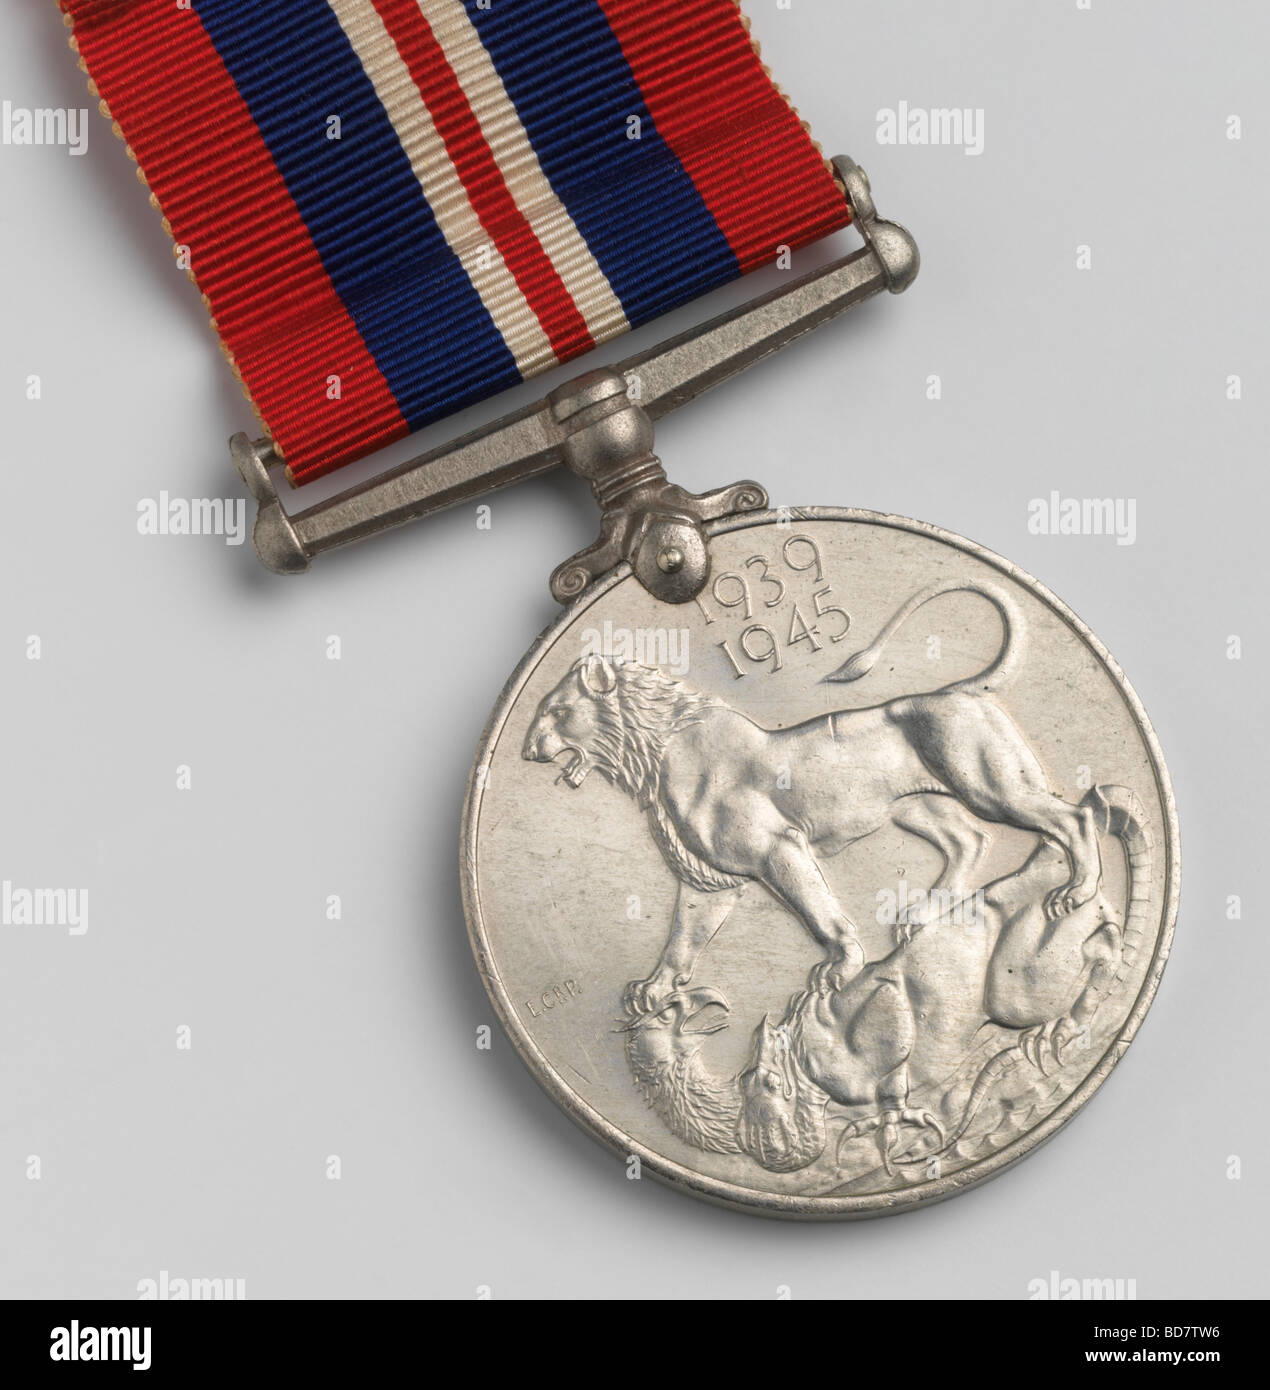 The reverse of a British and Commonwealth service medal from the second world war Stock Photo